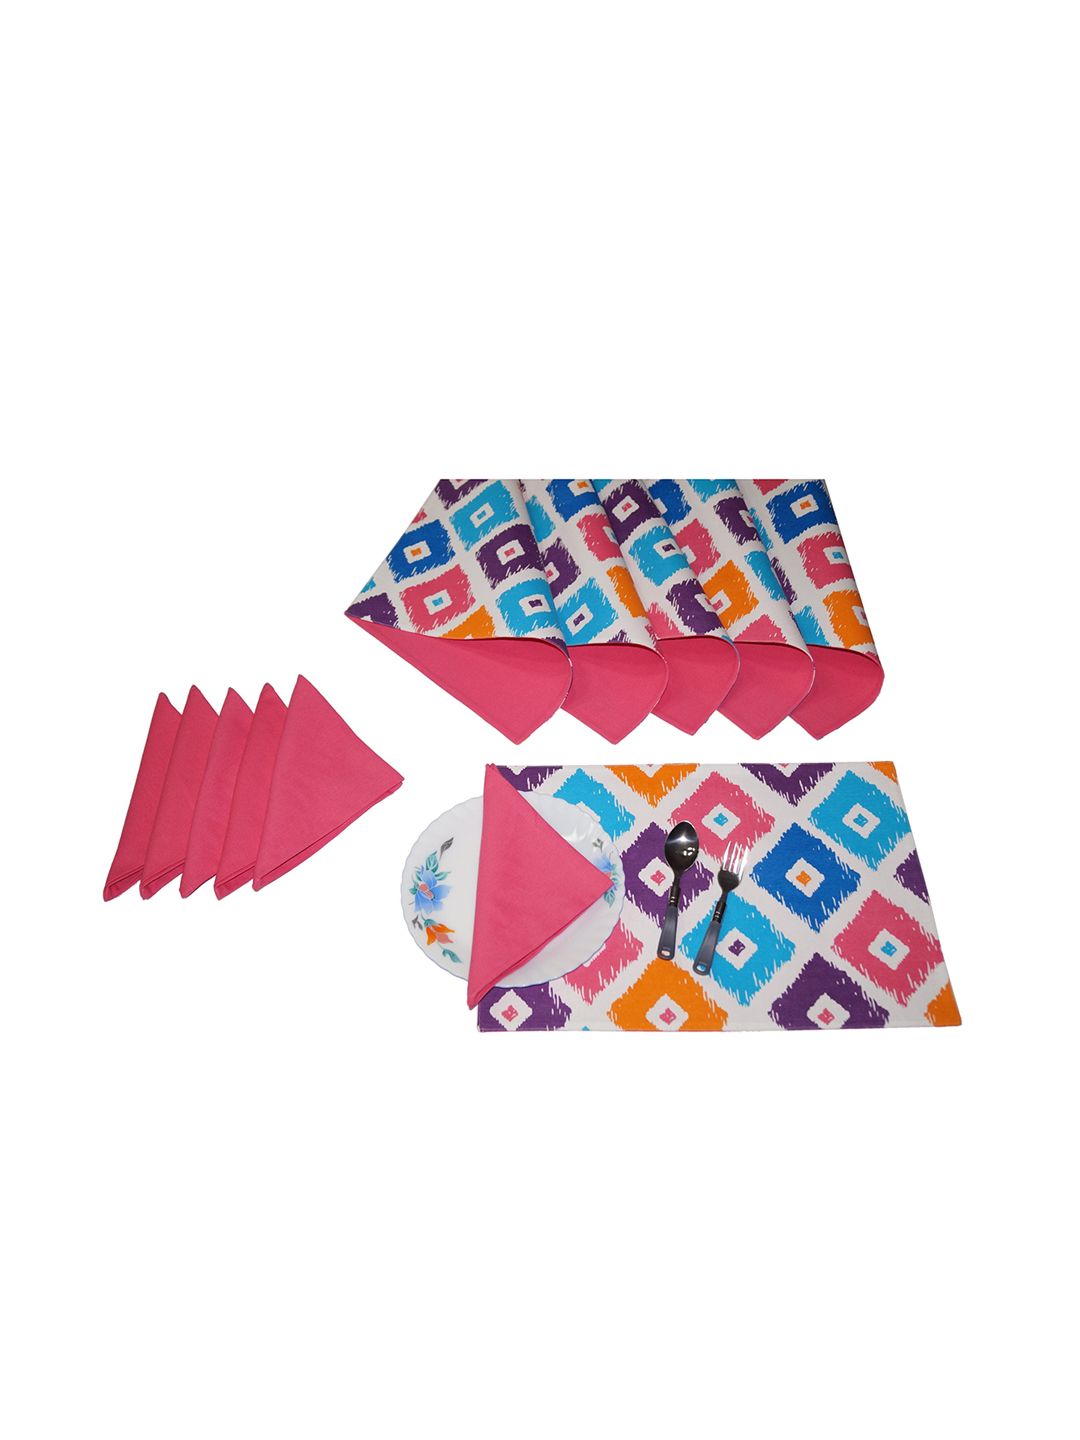 Lushomes Pack of 6 Square Print Reversible Cotton Mats & 6 Plain Cotton Napkins Price in India